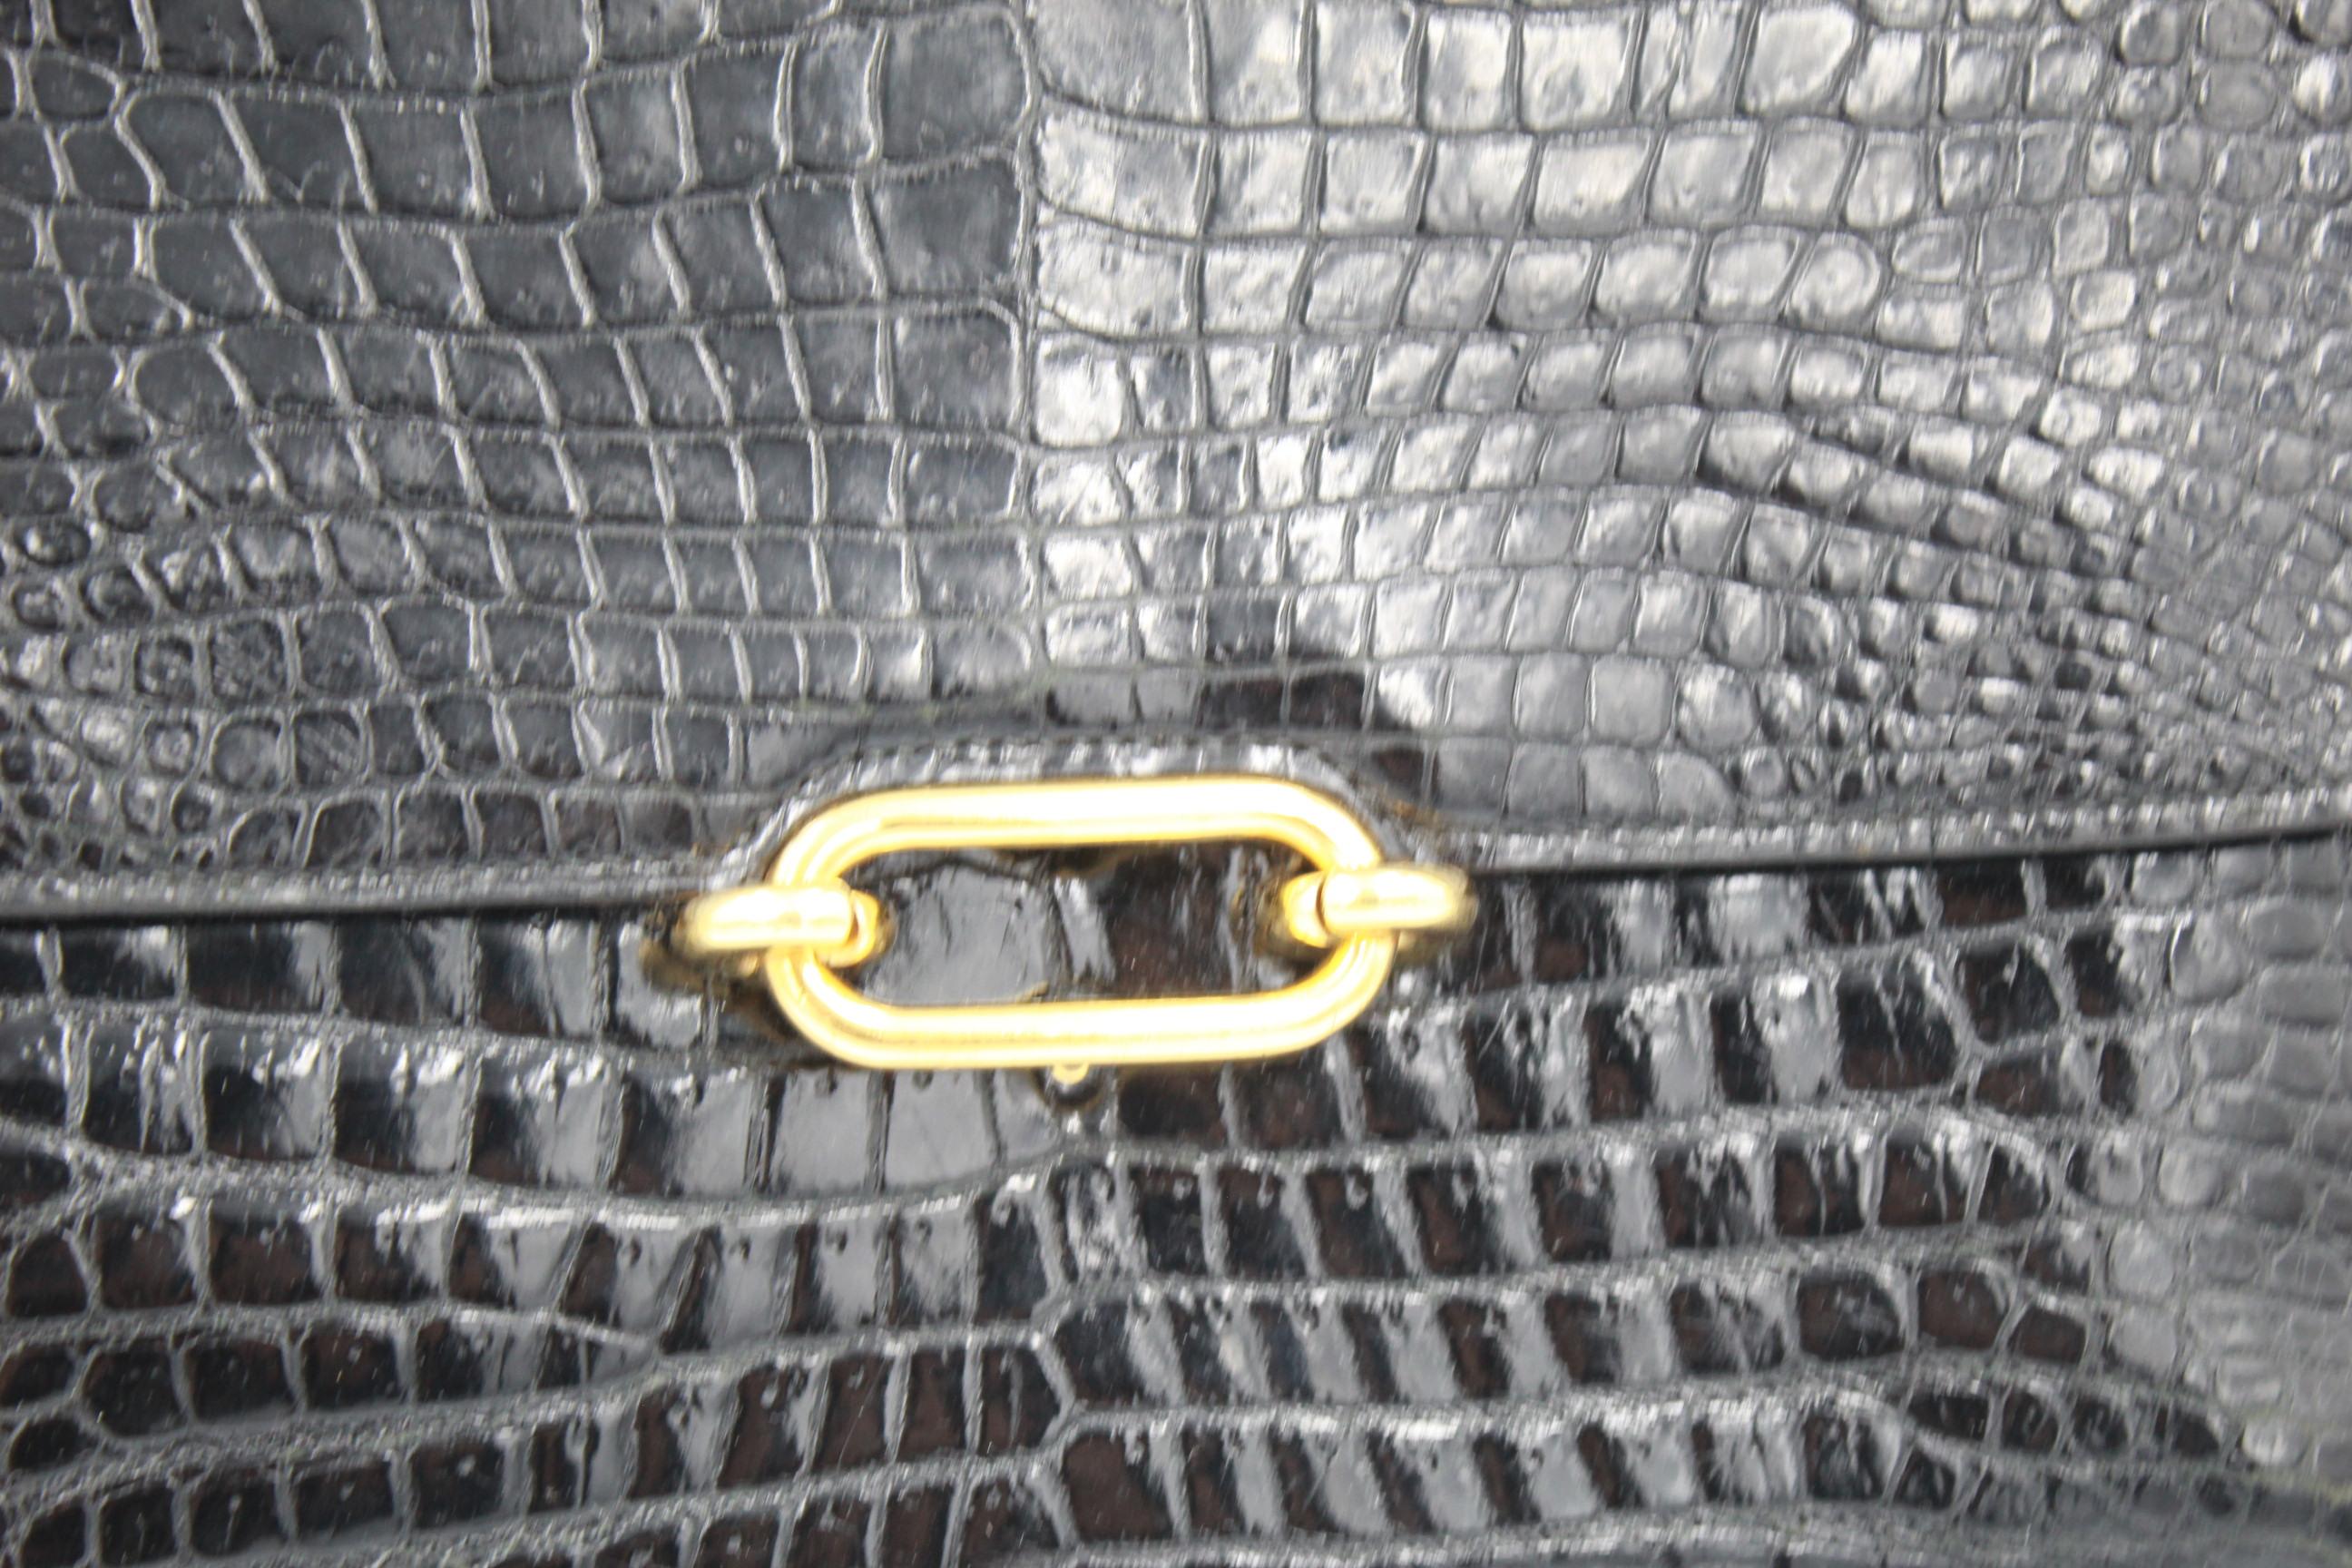 Really nice hard to find Hermes 1974 5d in circle) Fonsbelle bag in nblack crocodile
The strap can be doubled so It could be worn hand or shoulder ( just crossbidy for someone of small size)
Bag in relaly good vintage condition (some light signs of